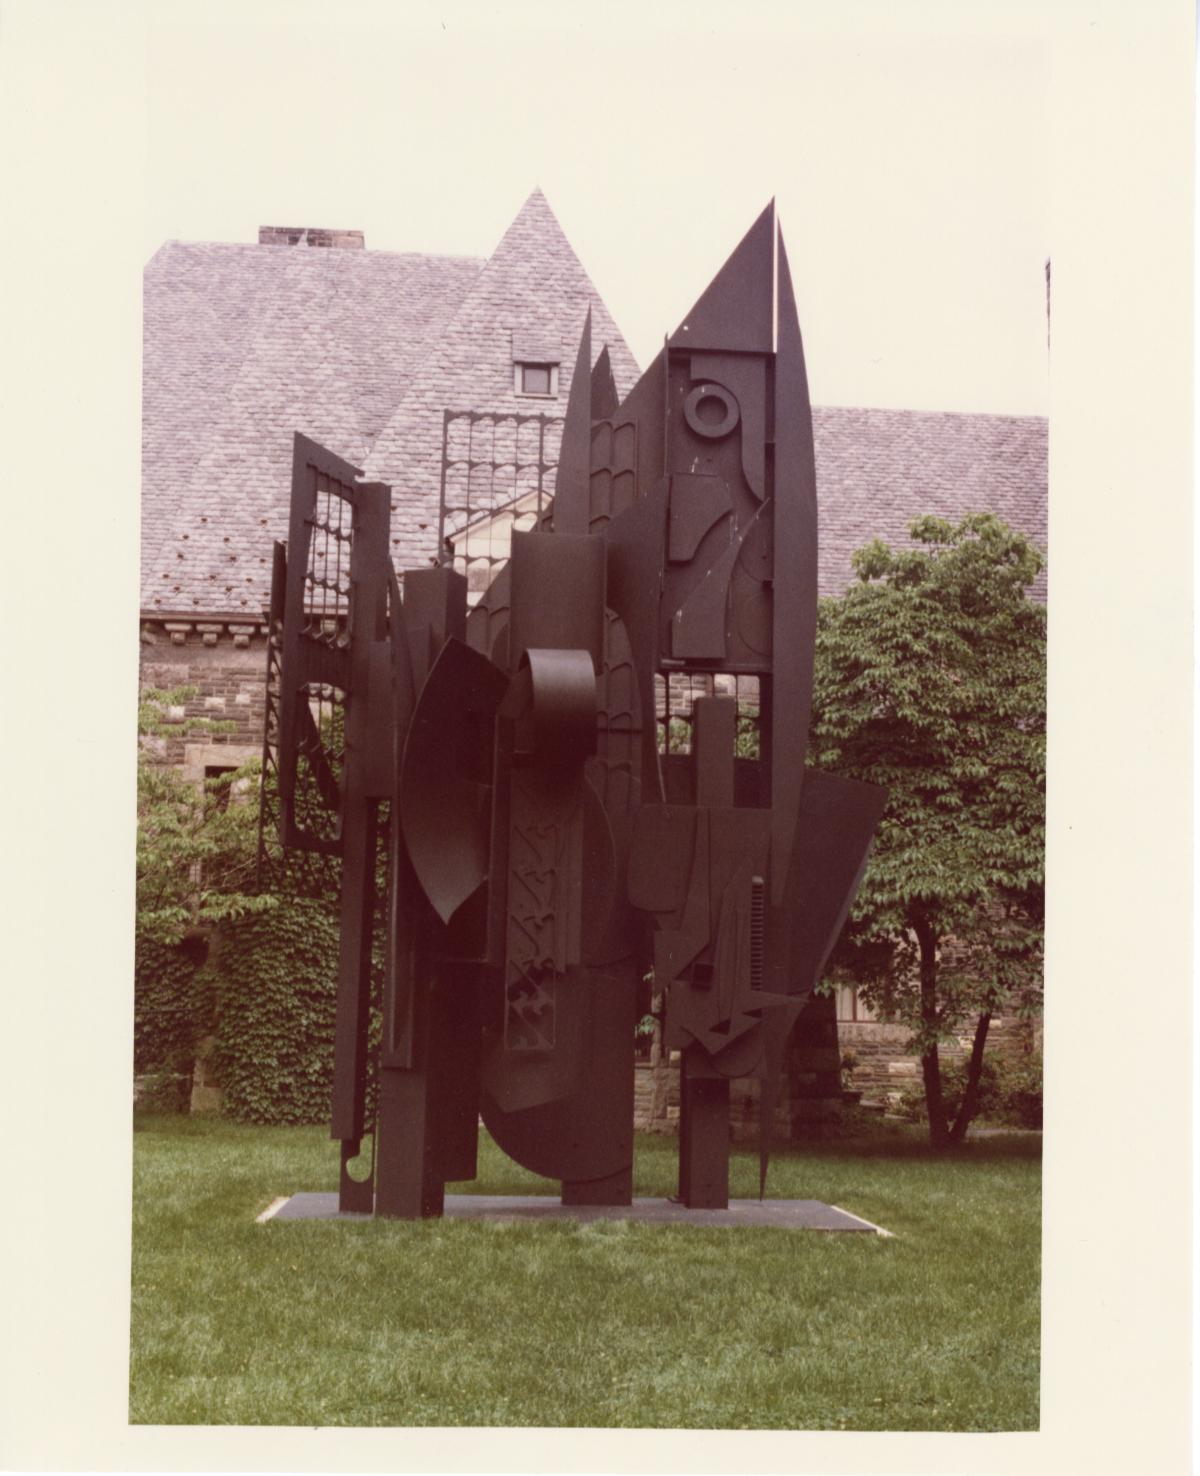 Louise Nevelson, Frozen Laces, 1981 (installation view, 1981)